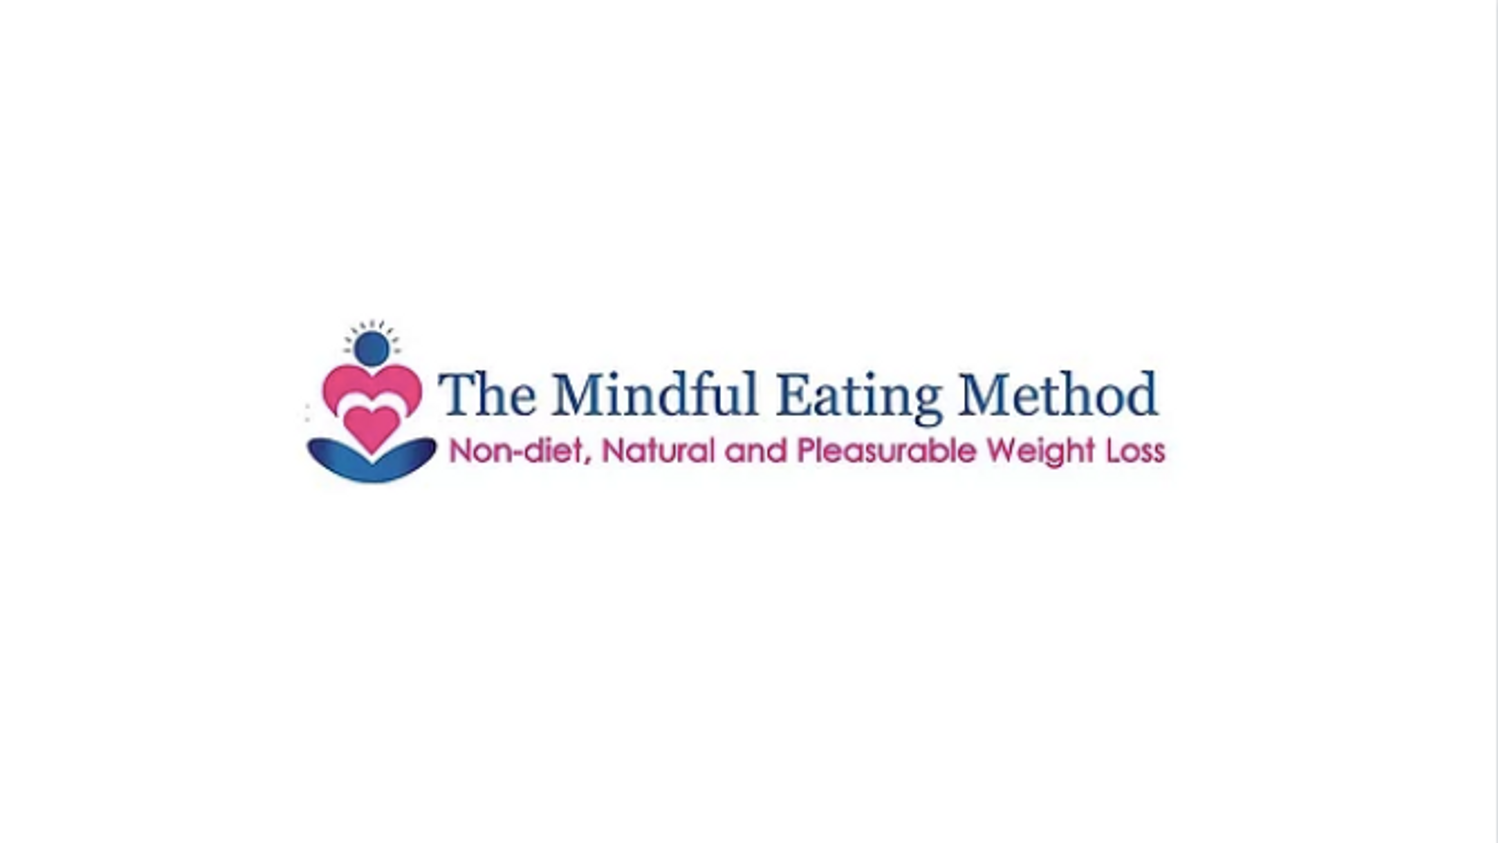 Mindful Eating Method Key #1 - Why Diets Don't Work